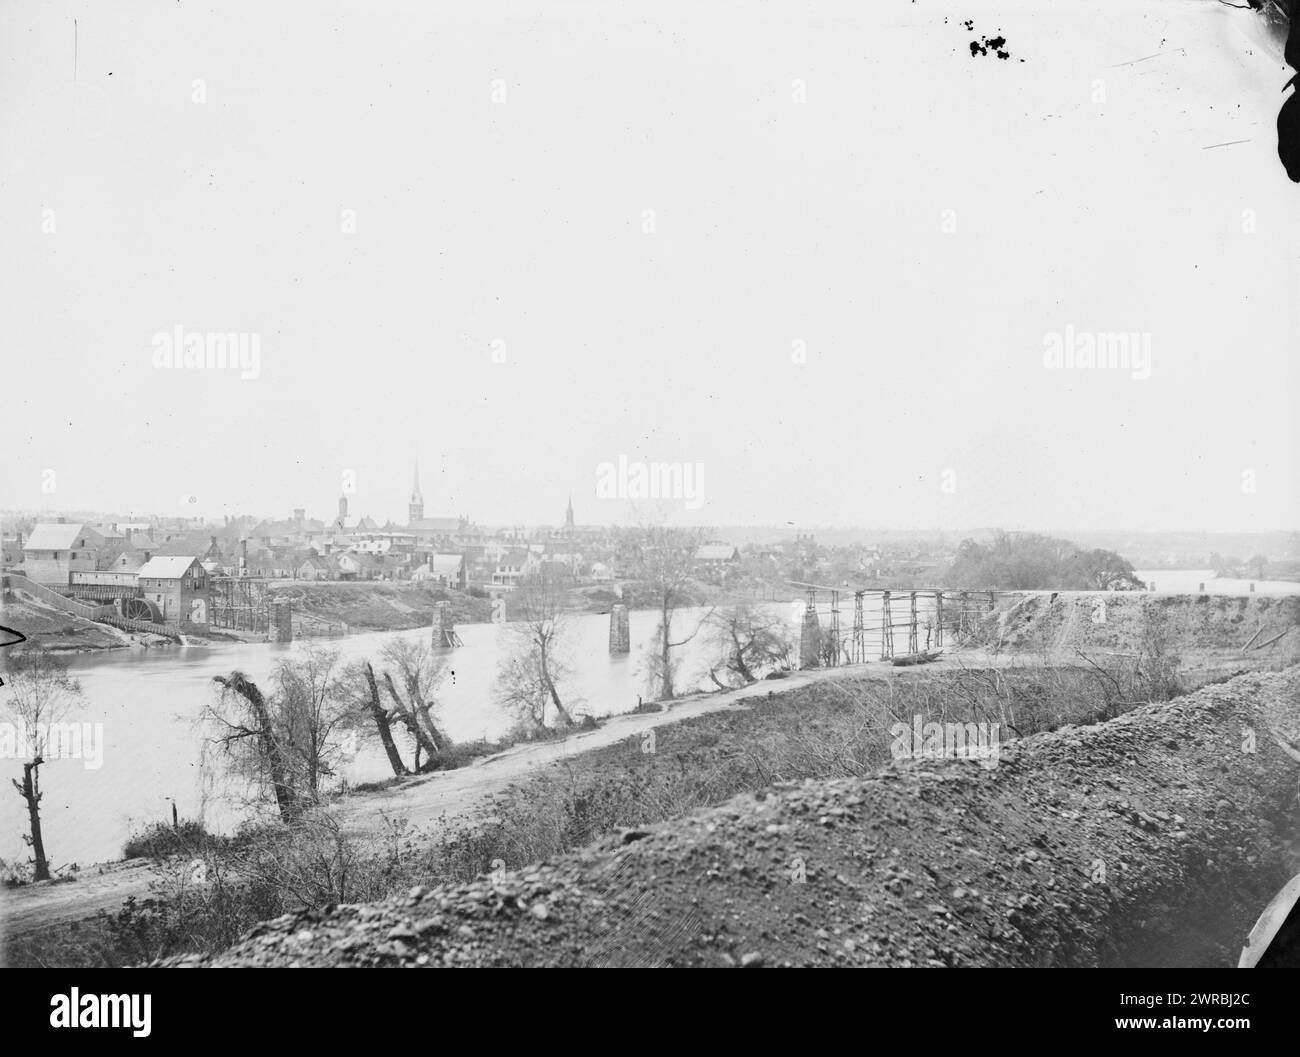 Fredericksburg, Virginia. View of town from east bank of the Rappahannock, O'Sullivan, Timothy H., 1840-1882, photographer, 1863 Mar., United States, History, Civil War, 1861-1865, Glass negatives, 1860-1870, Stereographs, 1860-1870, 1 negative: glass, stereograph, wet collodion, 4 x 10 in Stock Photo